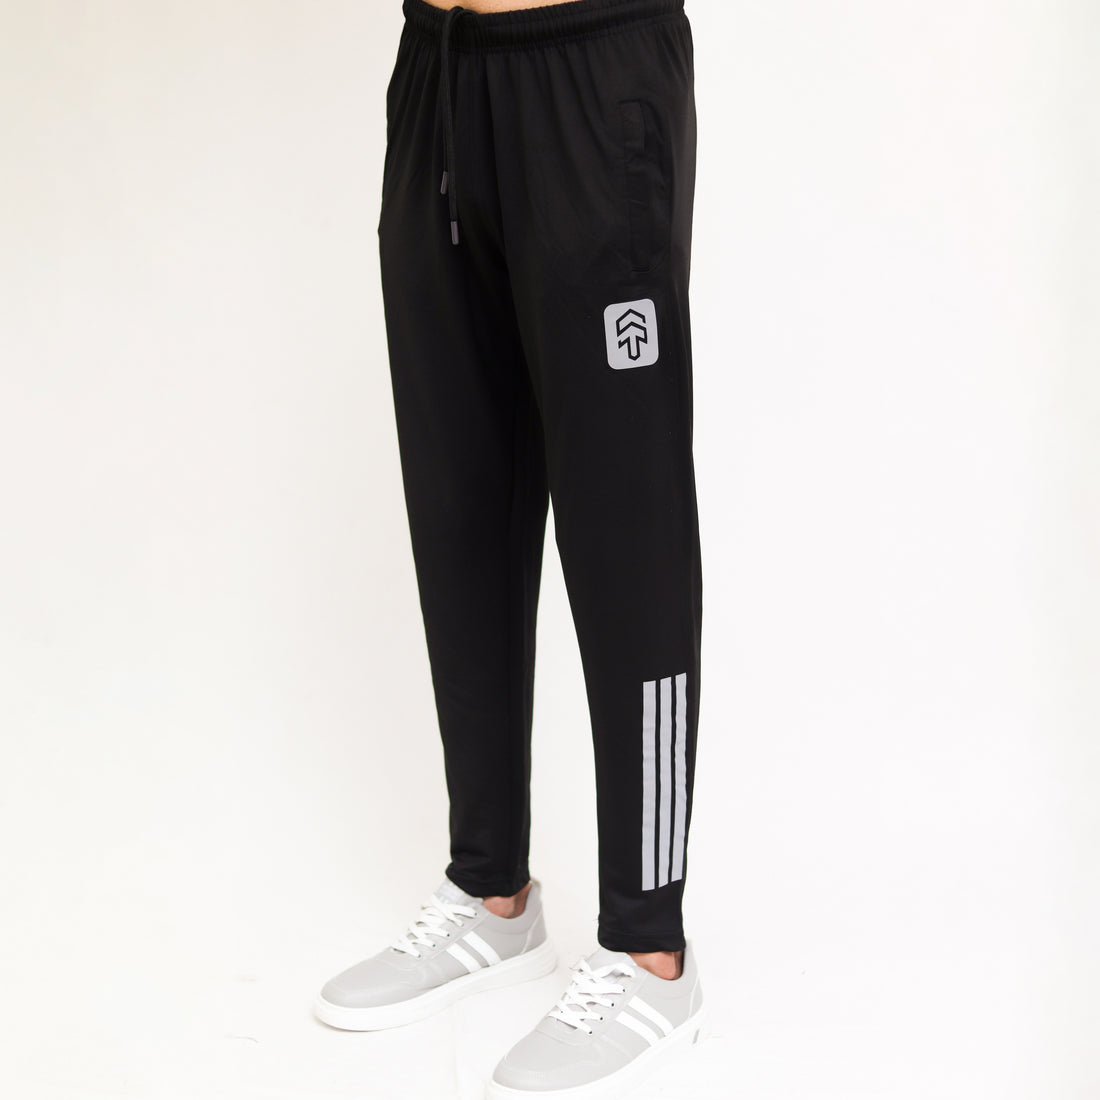 Black Lycra Quick Dry Trouser with Three Stripes